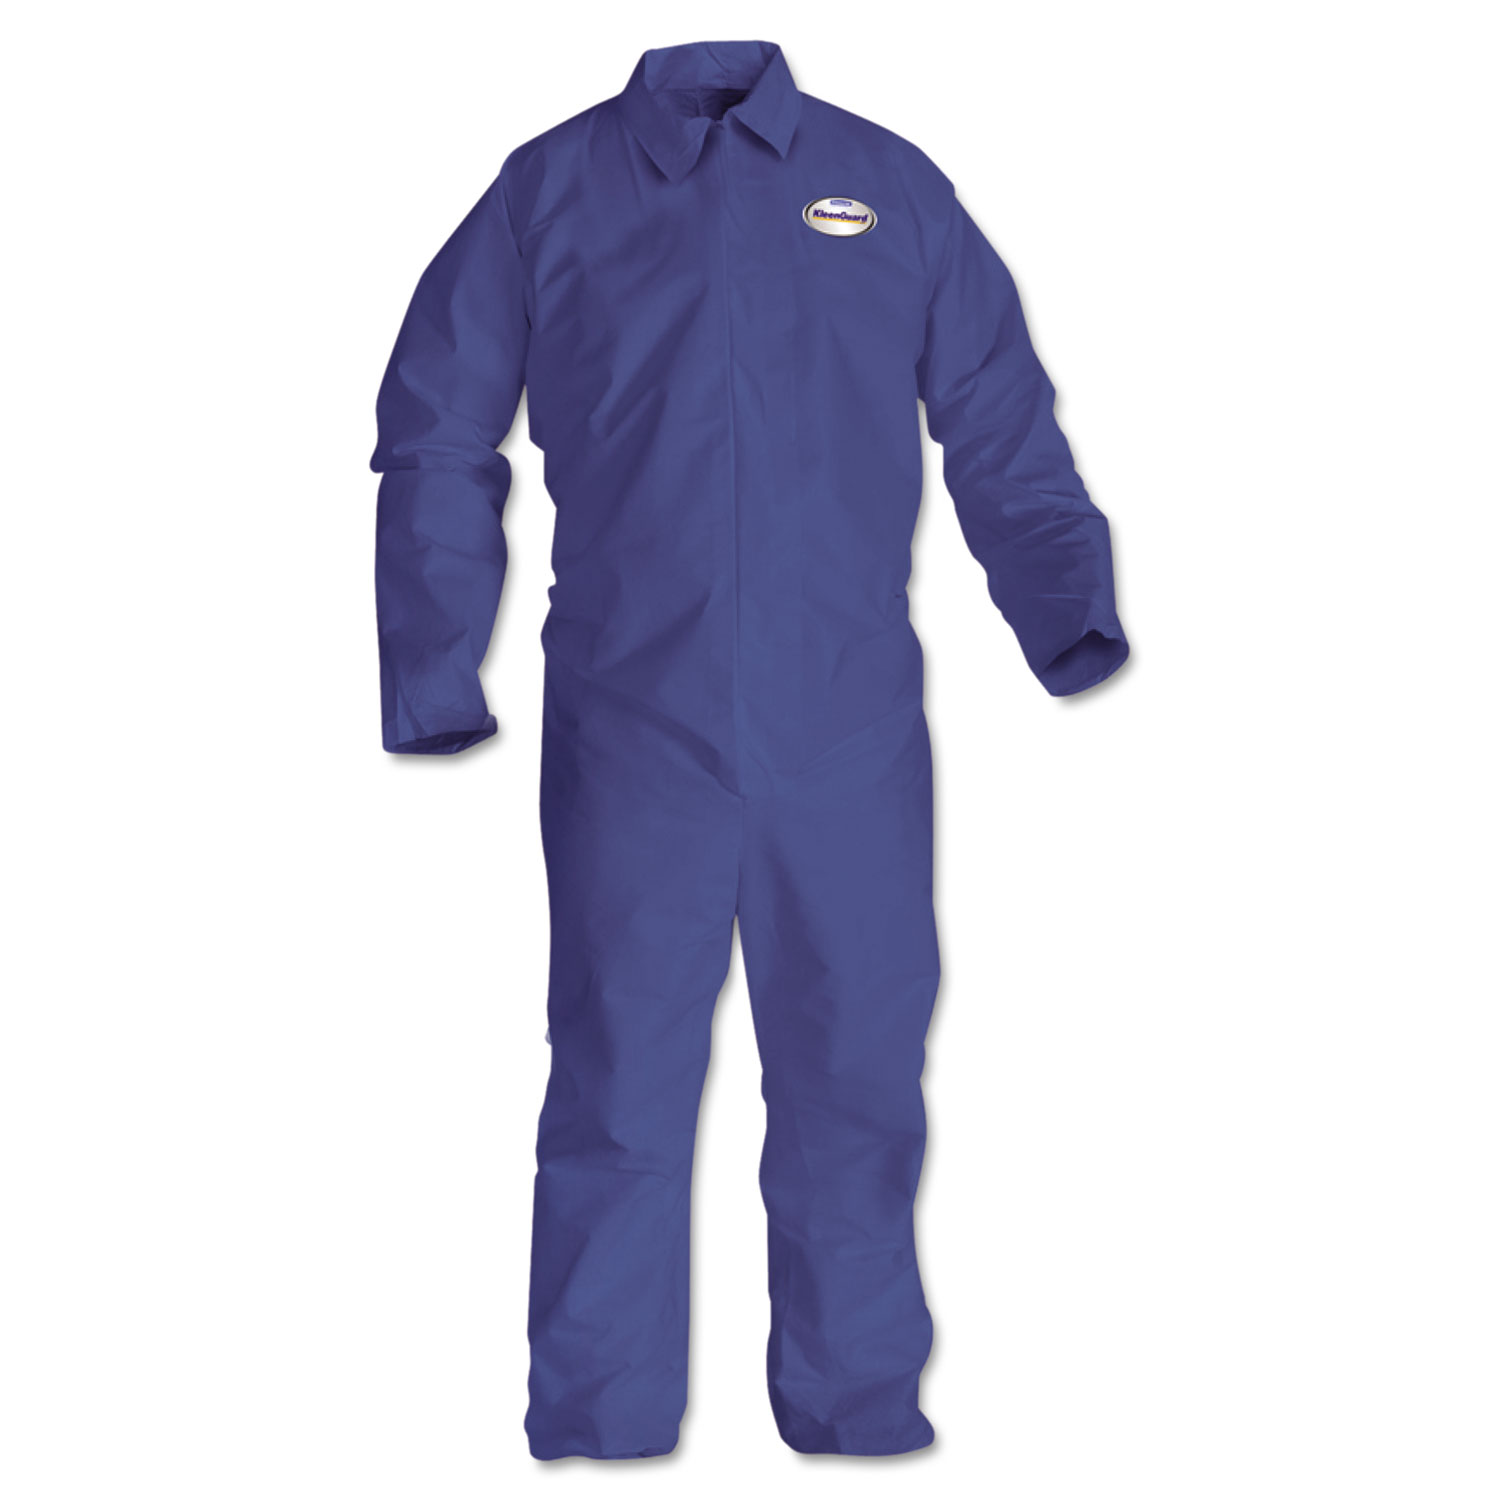 A65 Flame Resistant Coveralls, 2X-Large, Blue